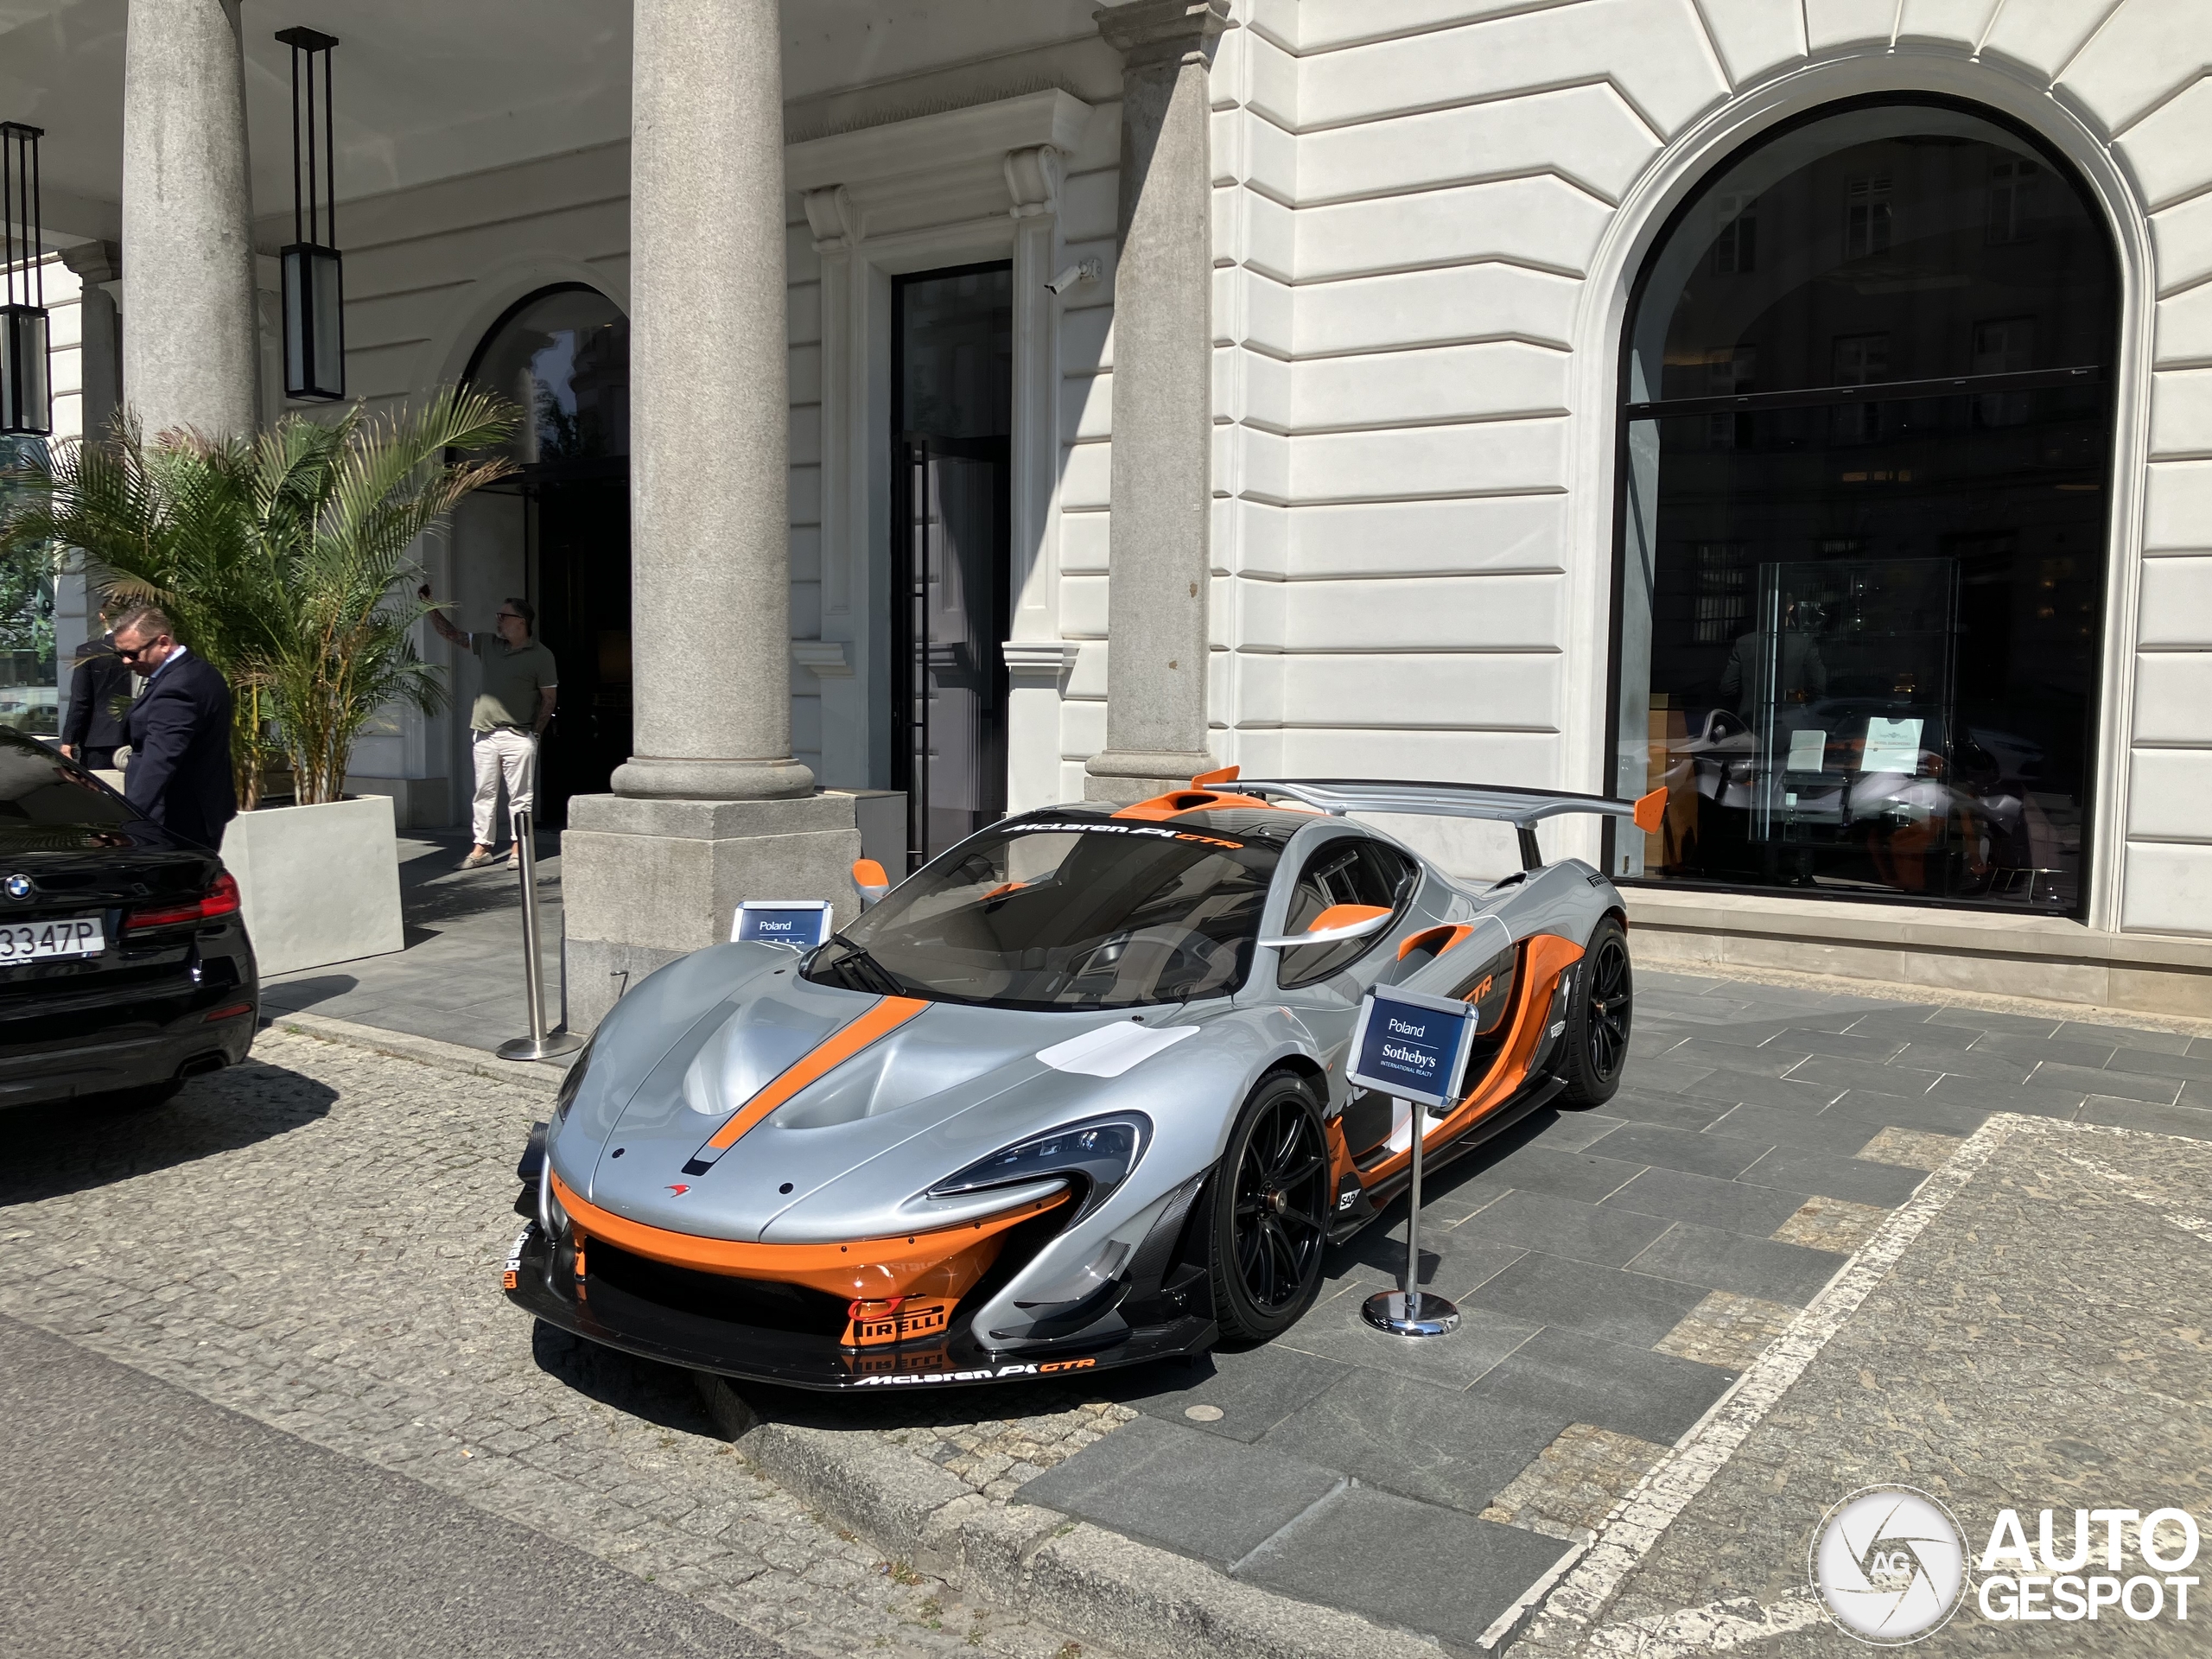 Do you feel the need to buy a P1 GTR?